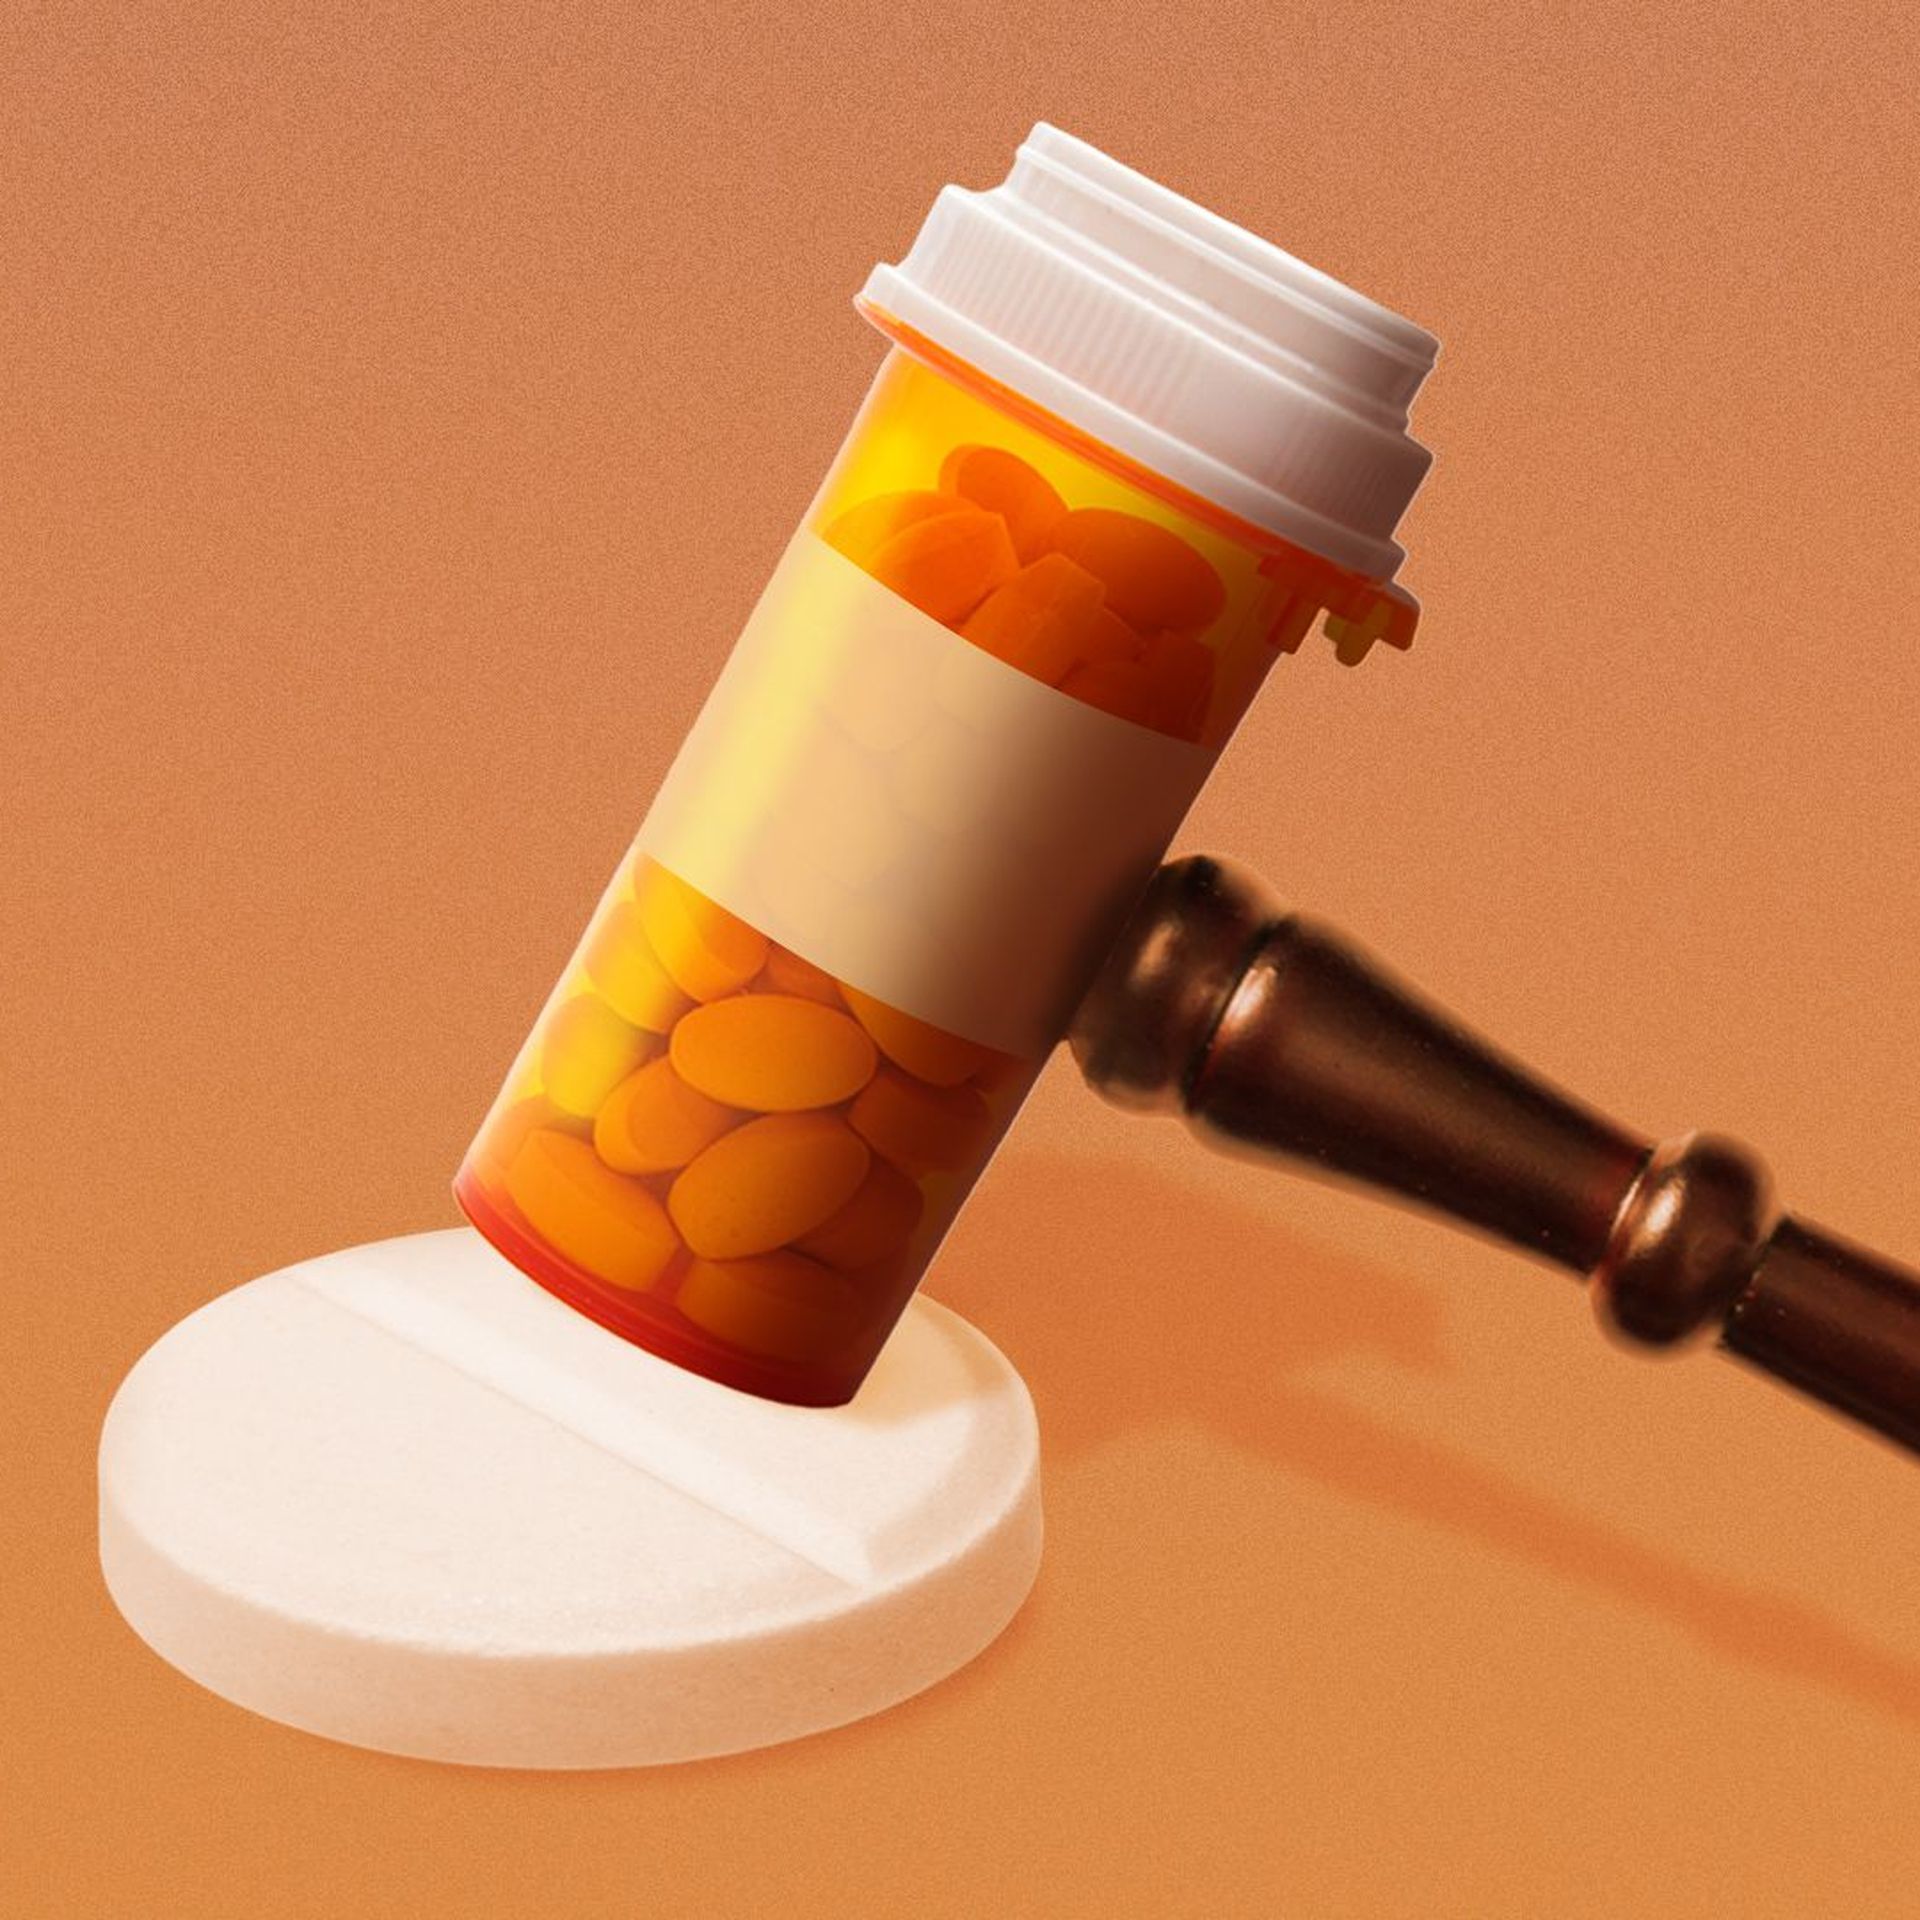 Illustration of a gavel made of a pill bottle, touching a gavel rest made of a white pill.